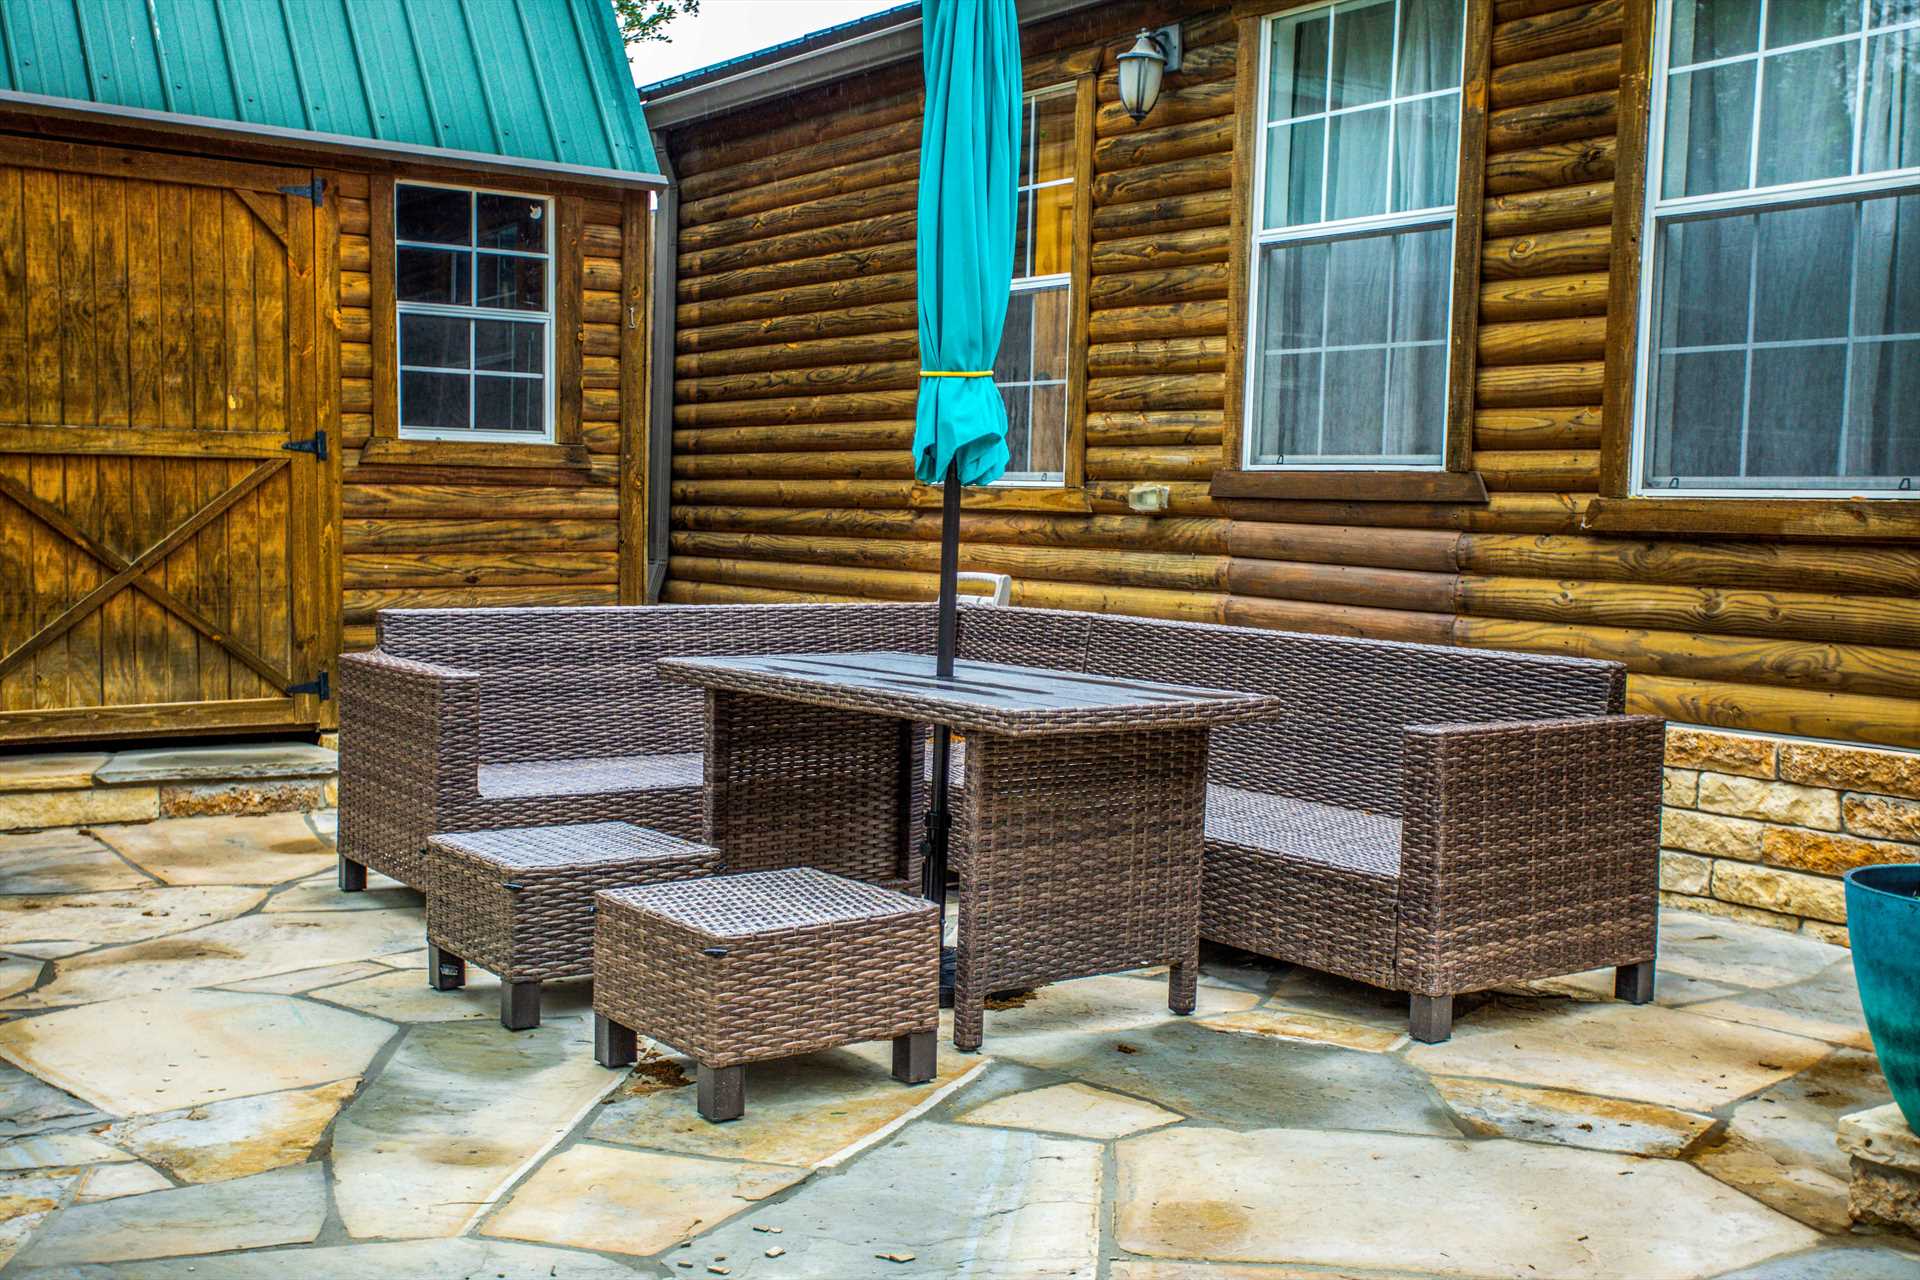                                                 Pop the umbrella for a shady hangout on the cabin's comfy outdoor suite!